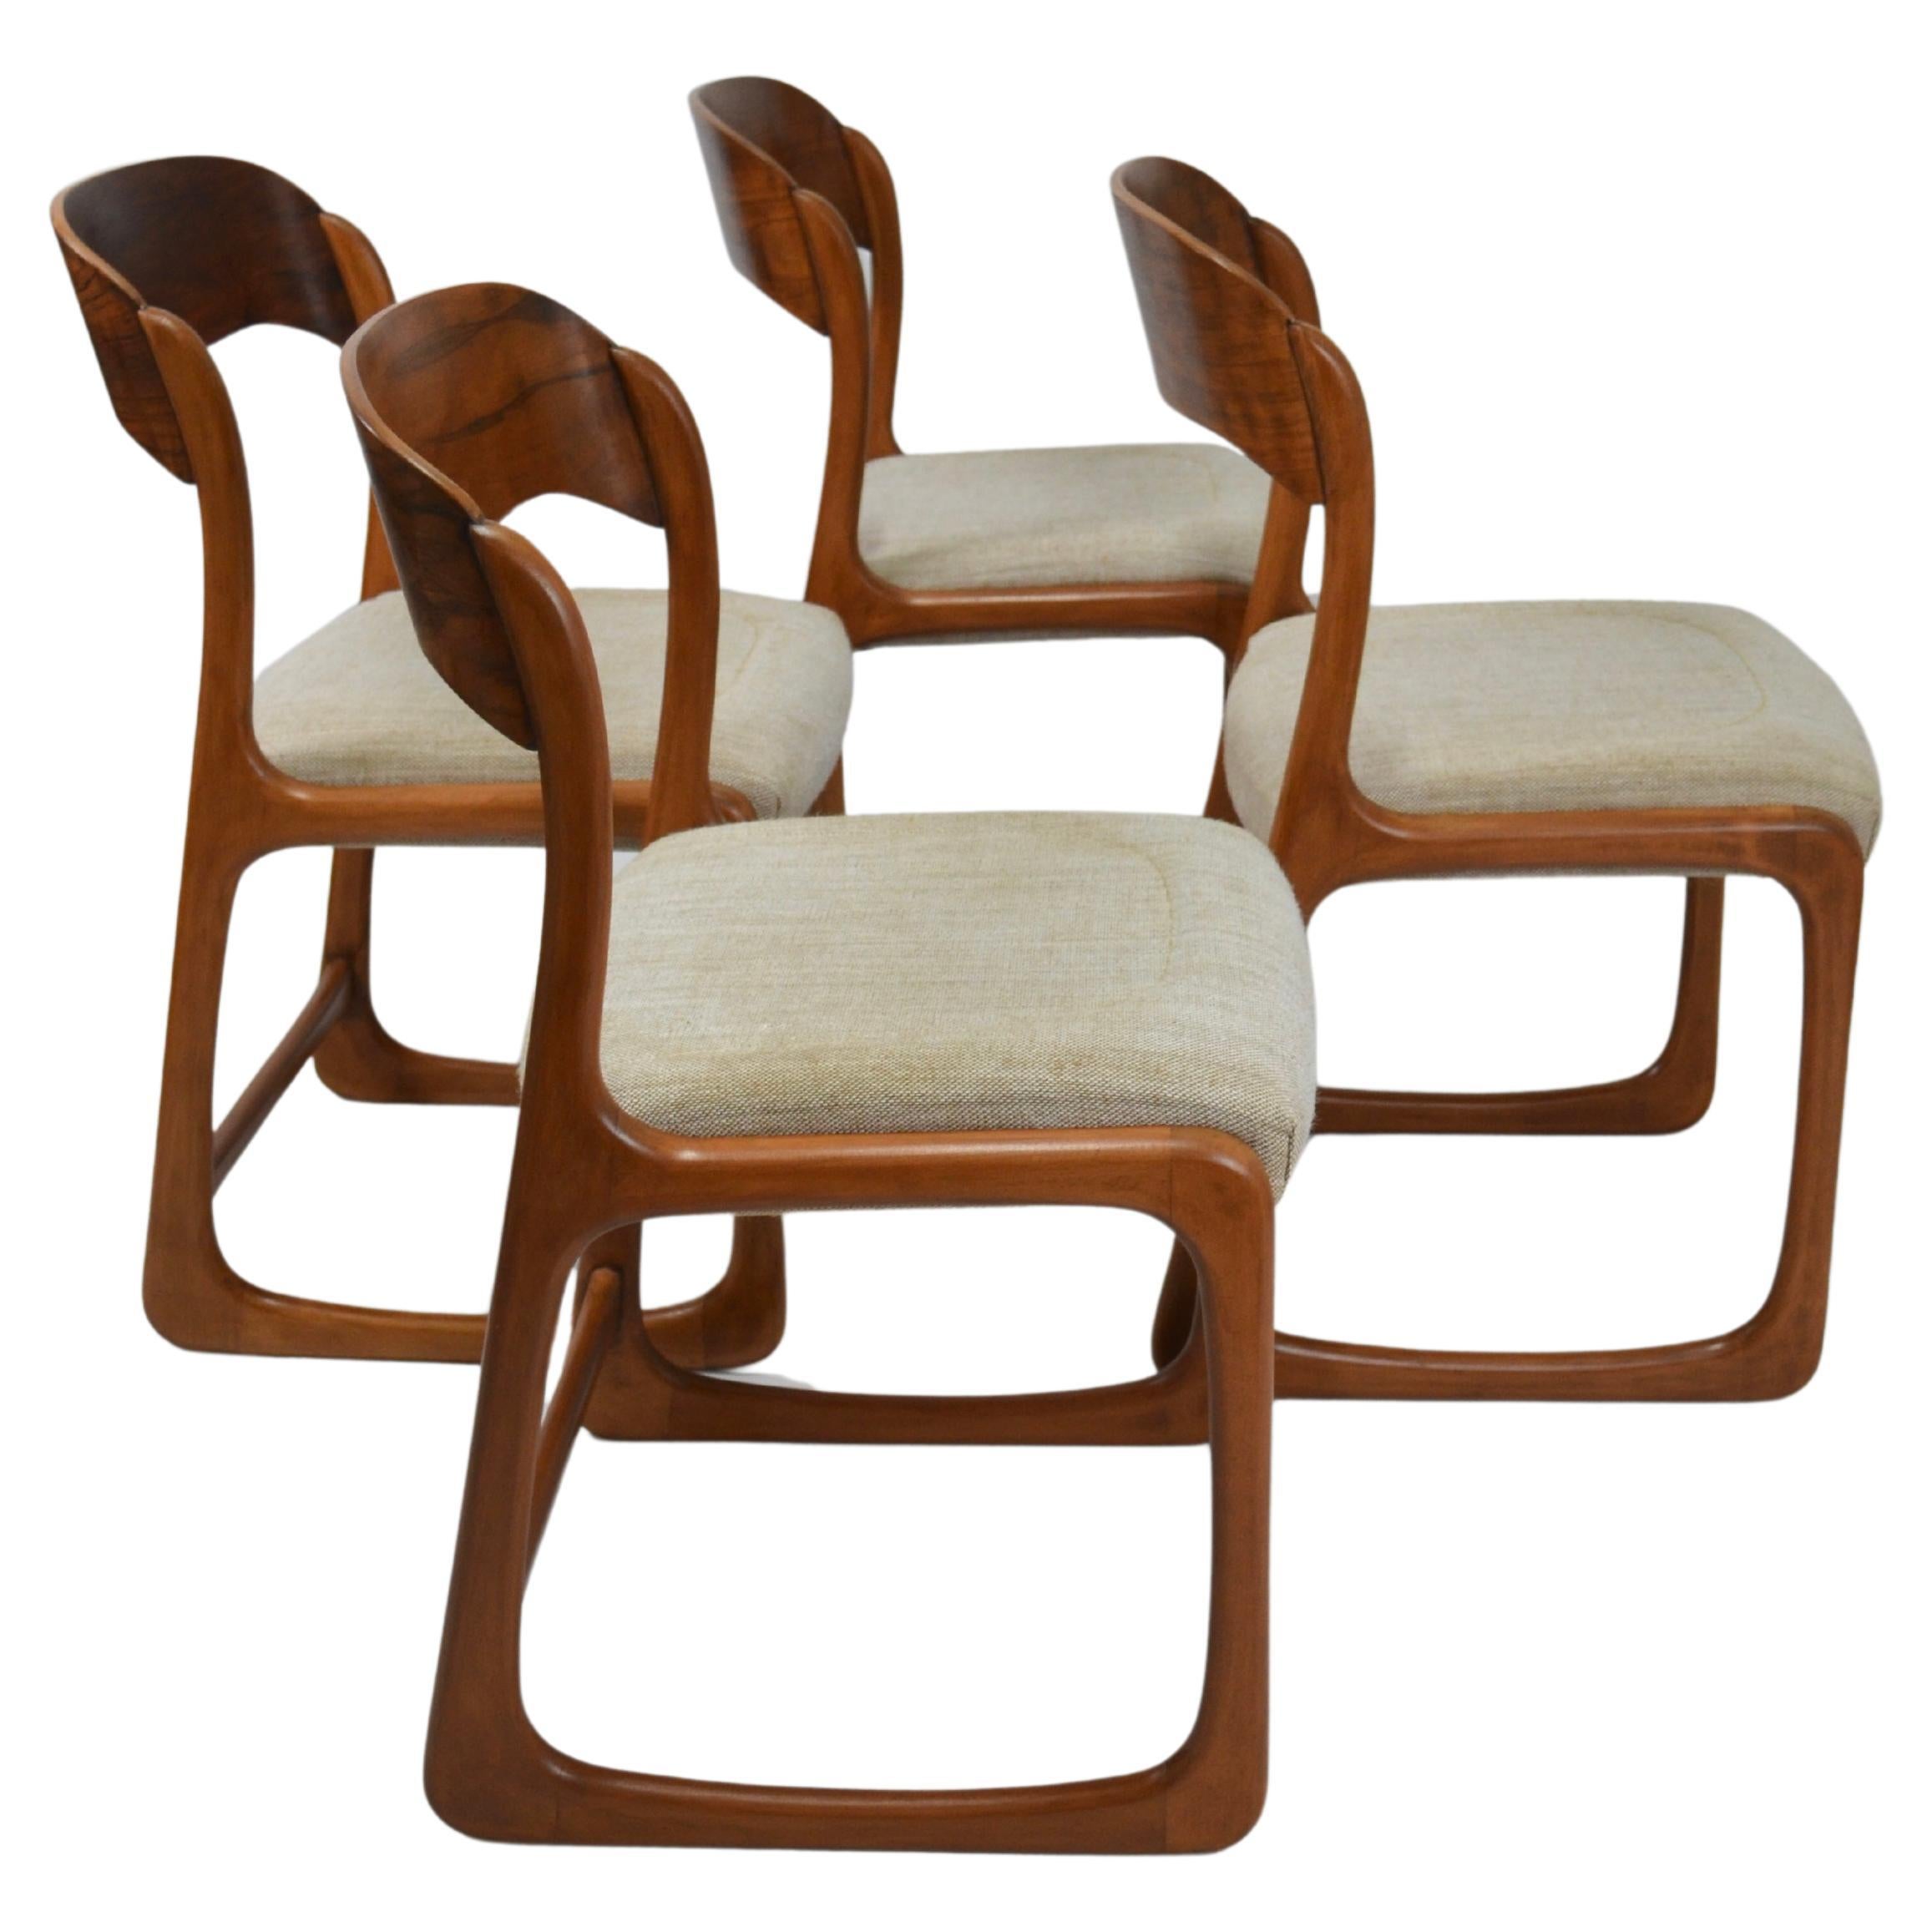 Vintage French Traineau or Sleigh Dining Chairs, Baumann, France, 60s For Sale